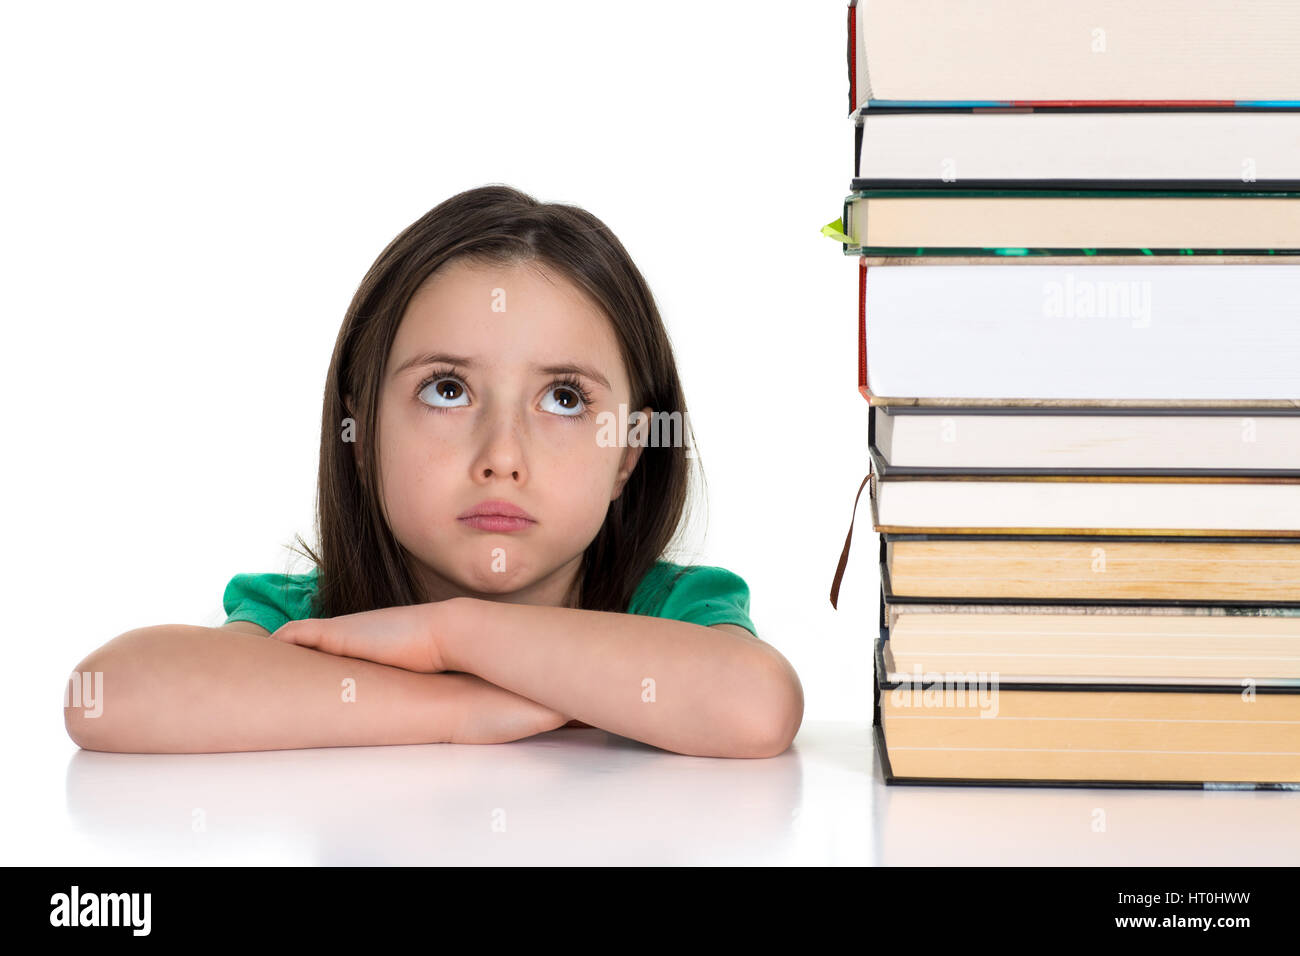 School girl looking up at the pile of books. Isolated on a white background. Stock Photo